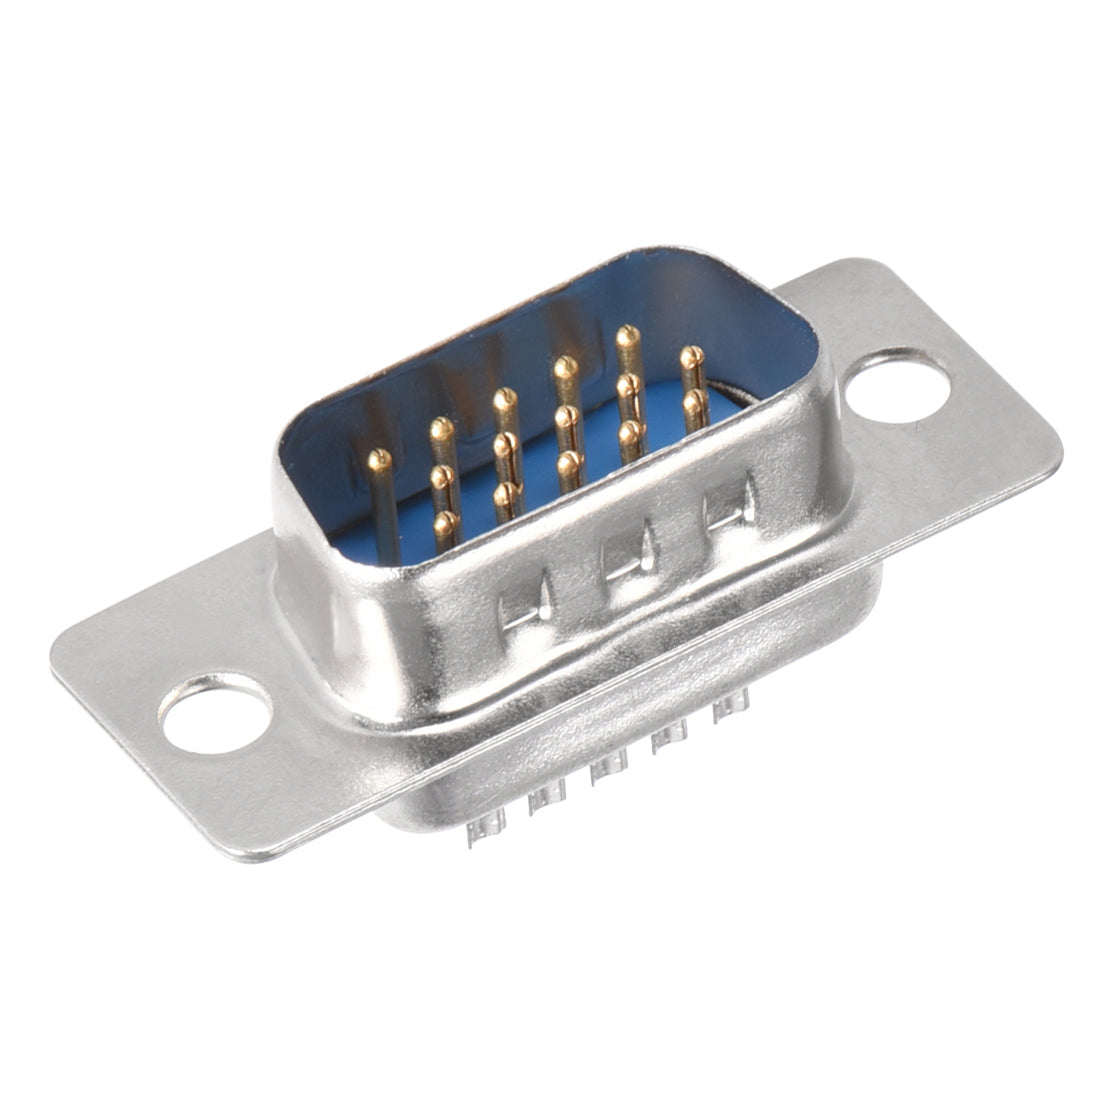 uxcell Uxcell D-sub Connector Male Plug 15-pin 3-row Port Terminal Breakout for Mechanical Equipment CNC Computers Blue 20pcs